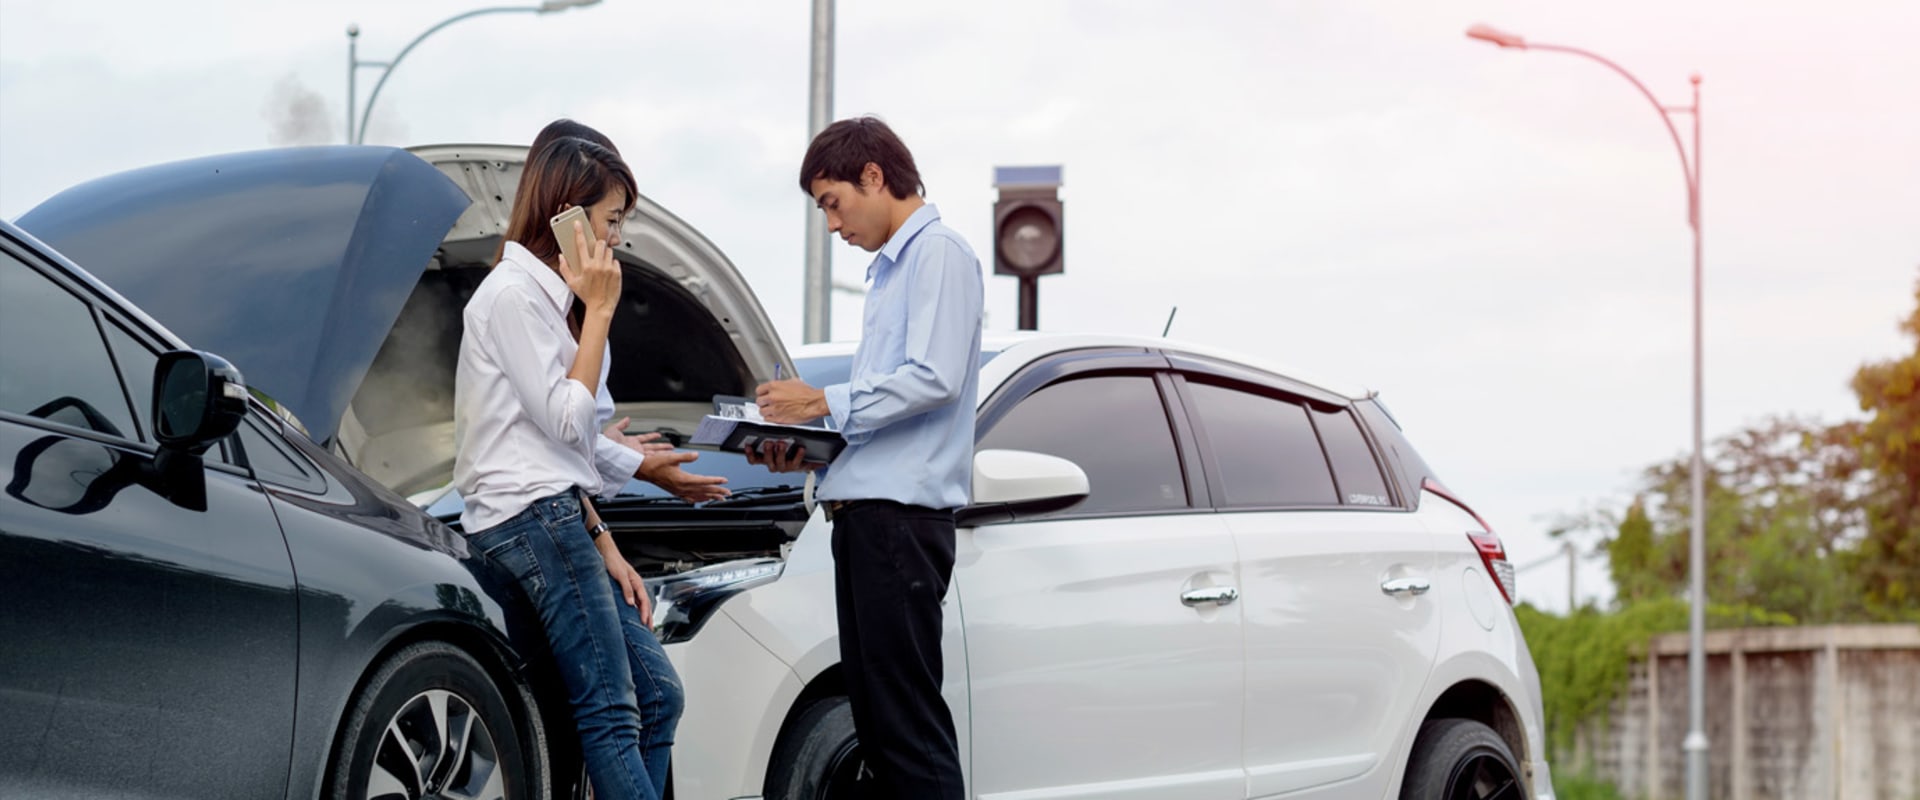 Hiring an Attorney for an Insurance Claim After an Uber Accident in Arizona